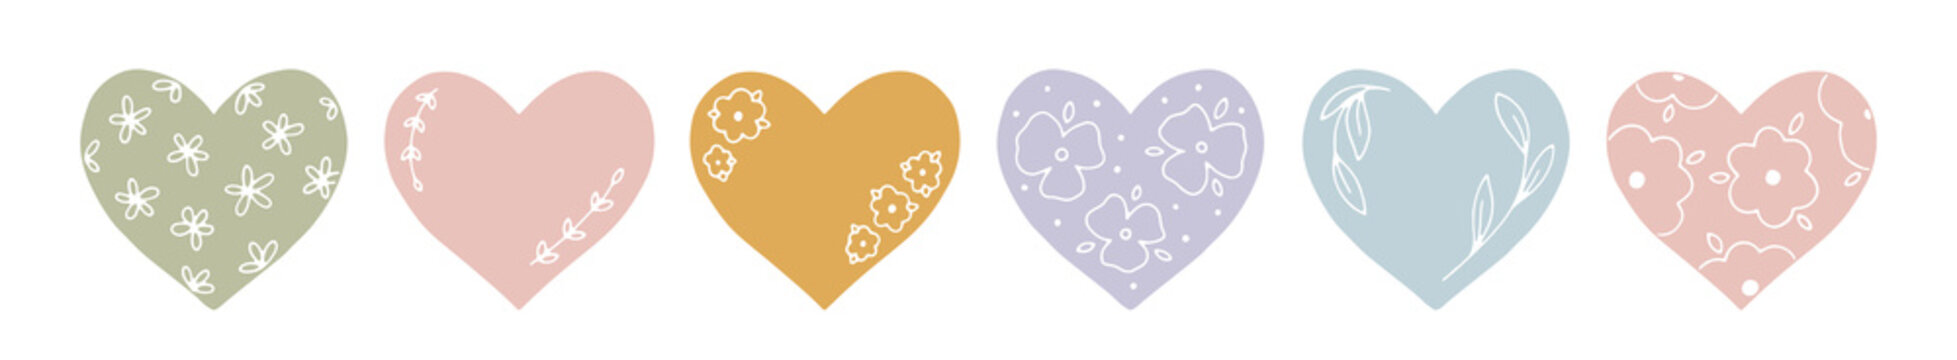 Set of hearts silhouettes with floral elements in pastel color. Hand drawn vector collection with love symbol for festive design, Mothers day and romantic holidays. Cute floral heart illustration